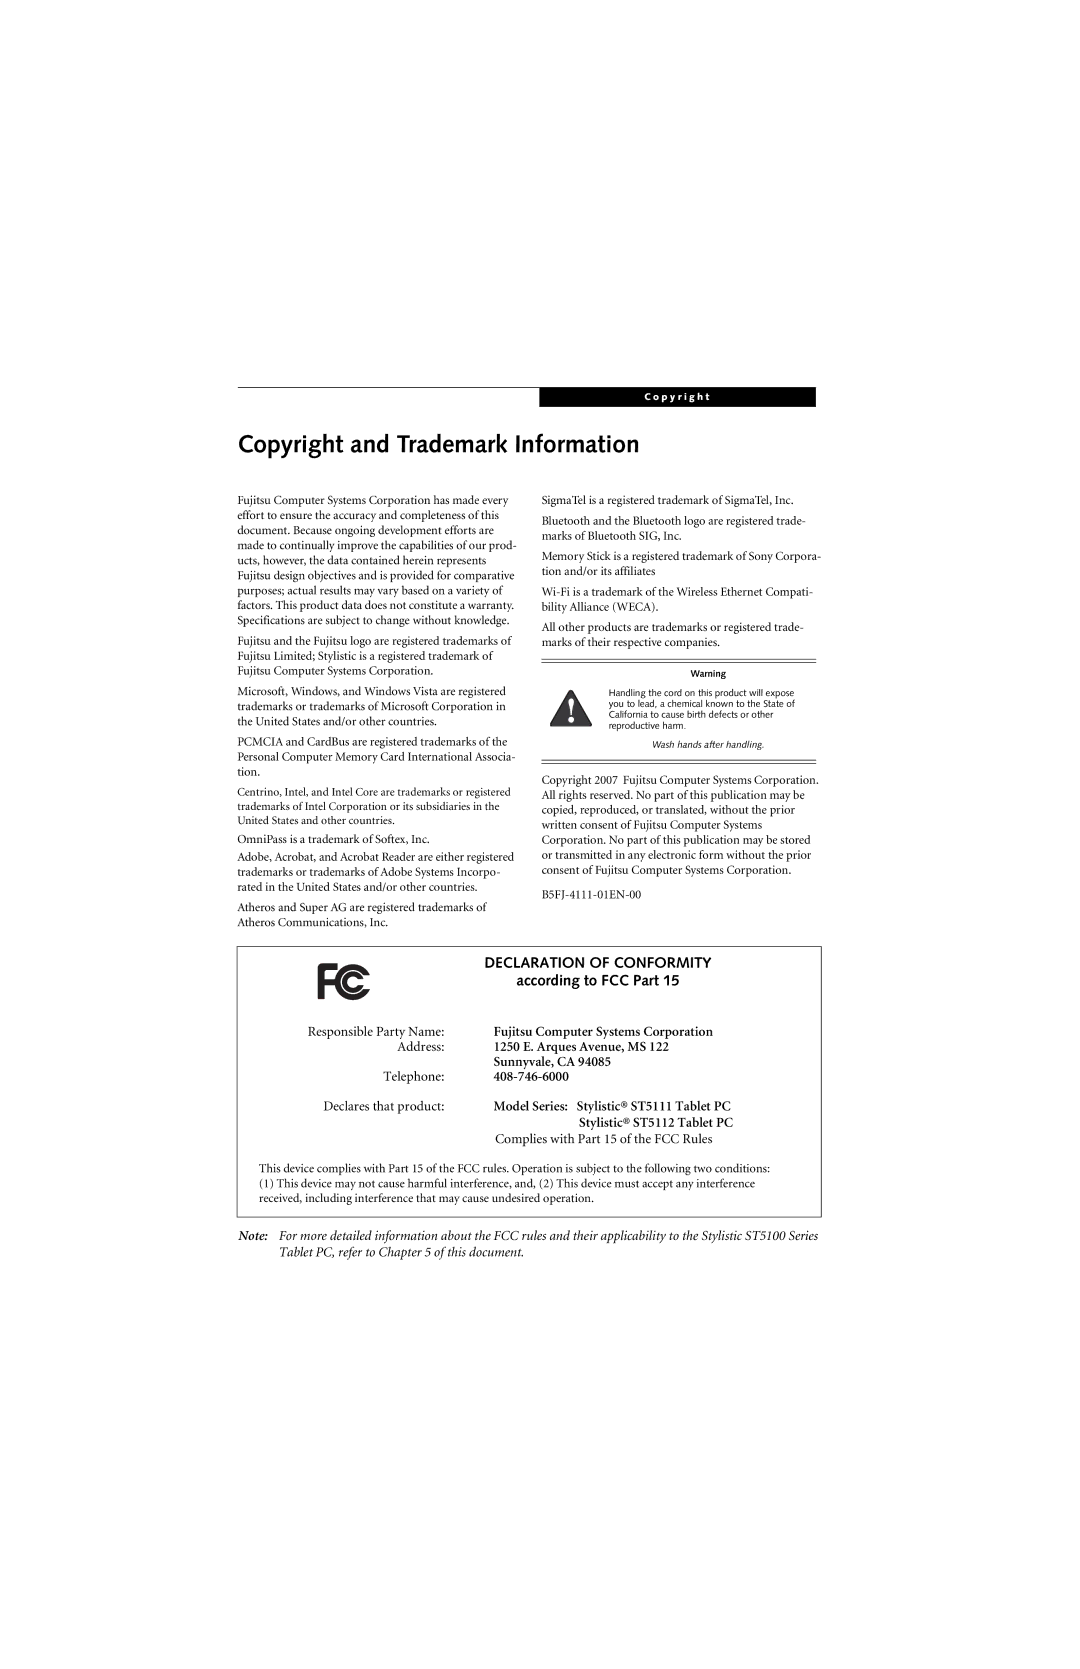 Fujitsu ST5111, ST5112 manual Copyright and Trademark Information, OmniPass is a trademark of Softex, Inc 